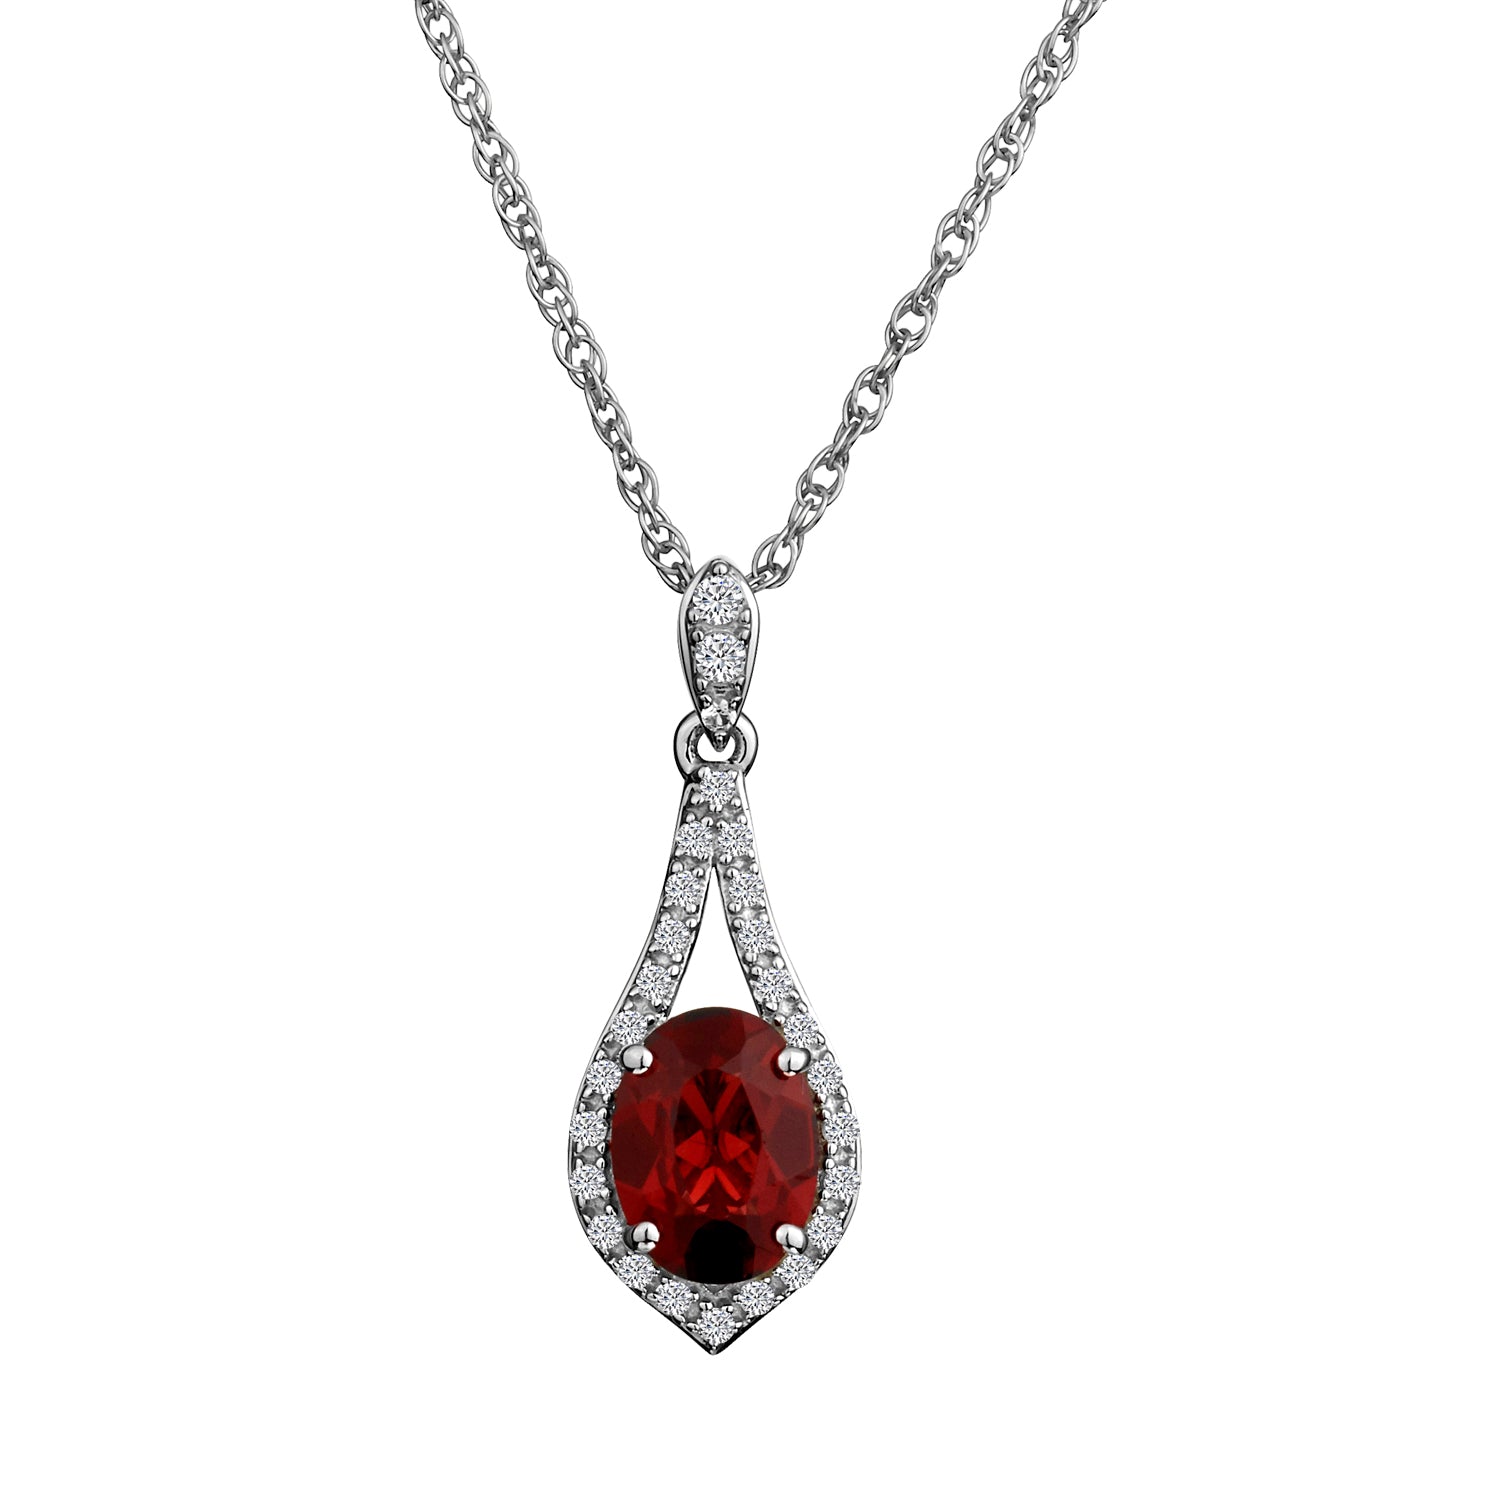 Garnet and Created White Topaz Pendant,  Sterling Silver. Necklaces and Pendants. Griffin Jewellery Designs. 